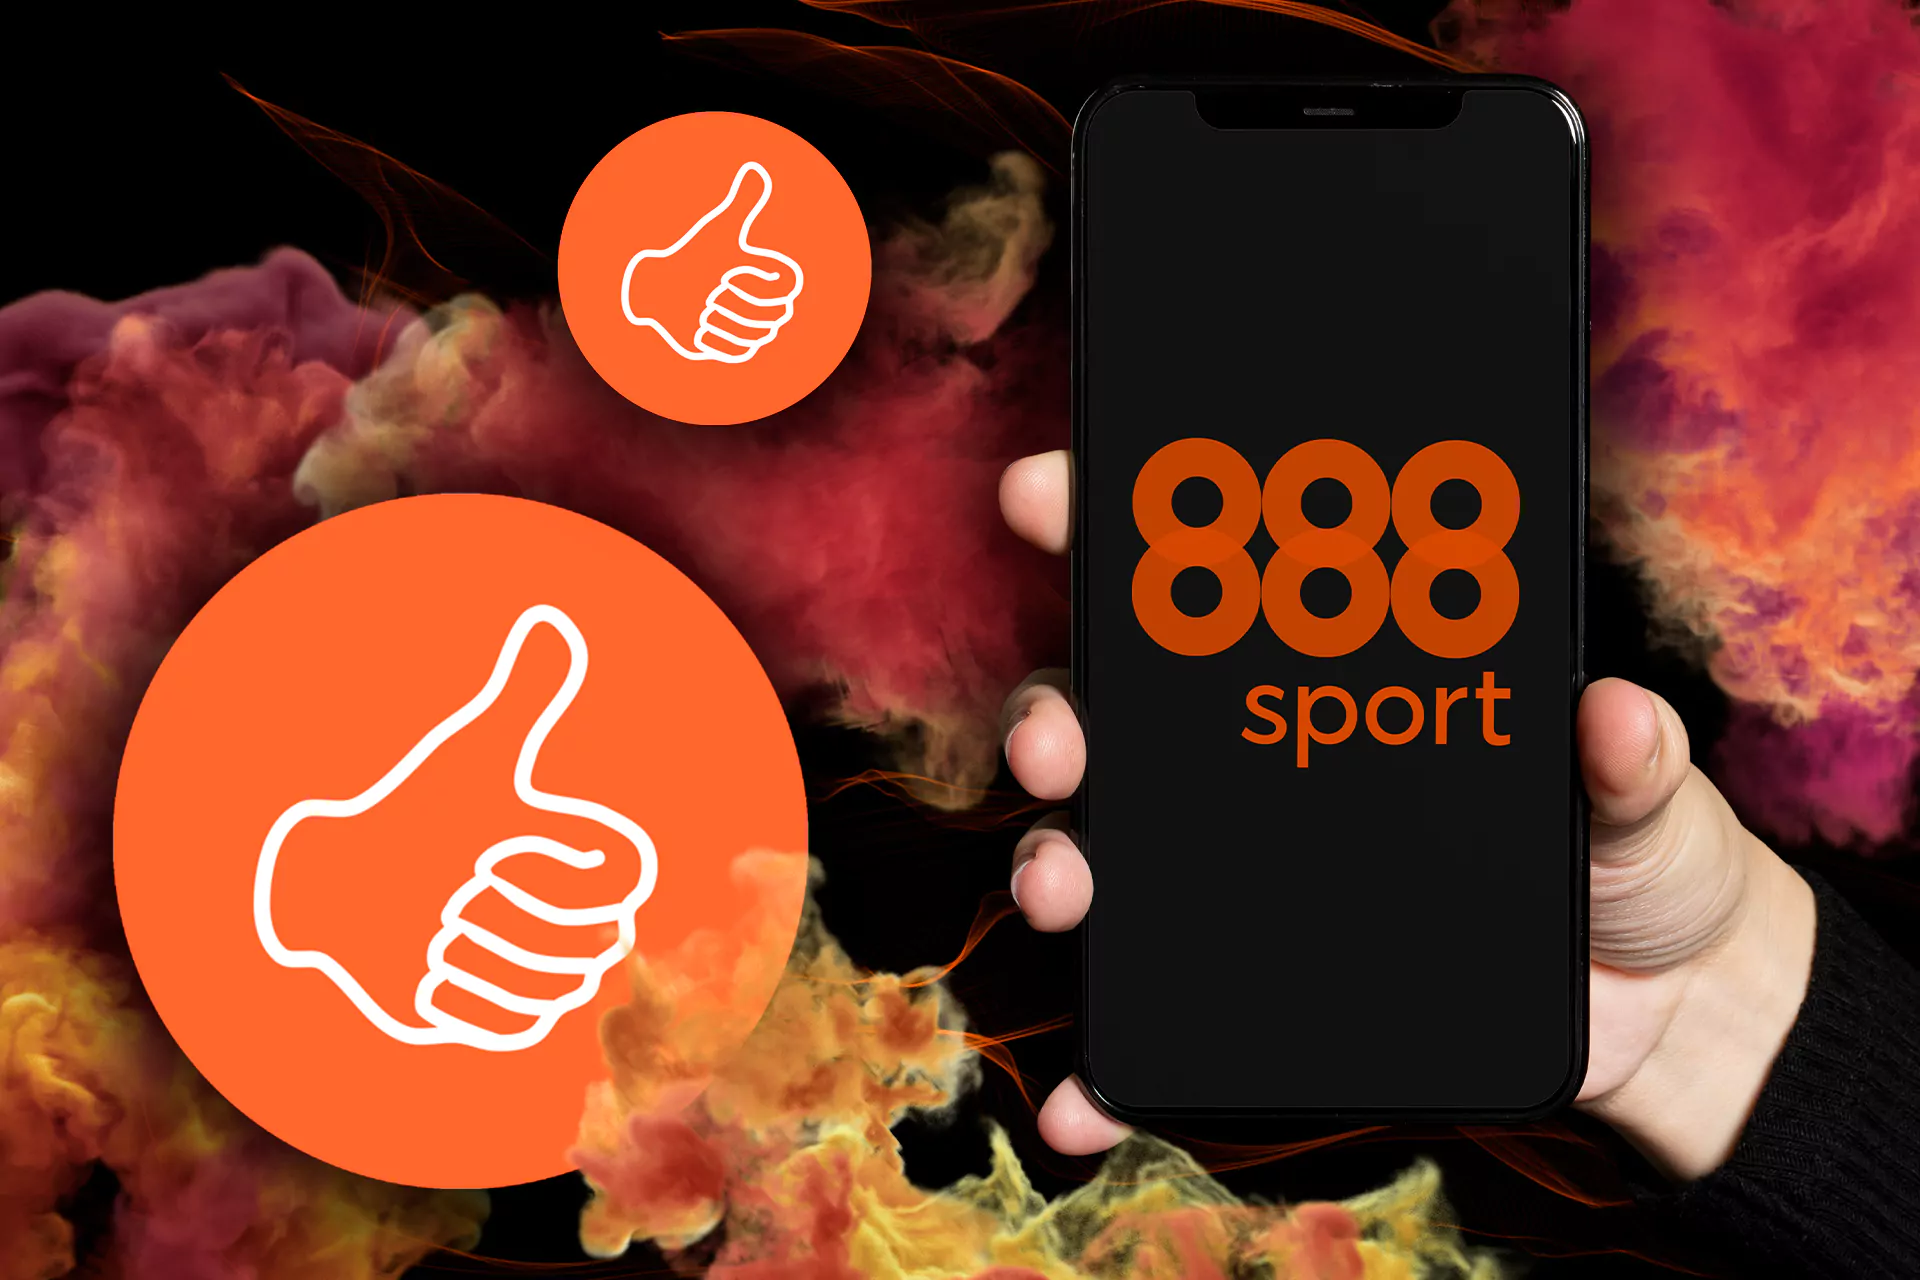 Sign up for 888sport and experience great cricket betting and casino playing.